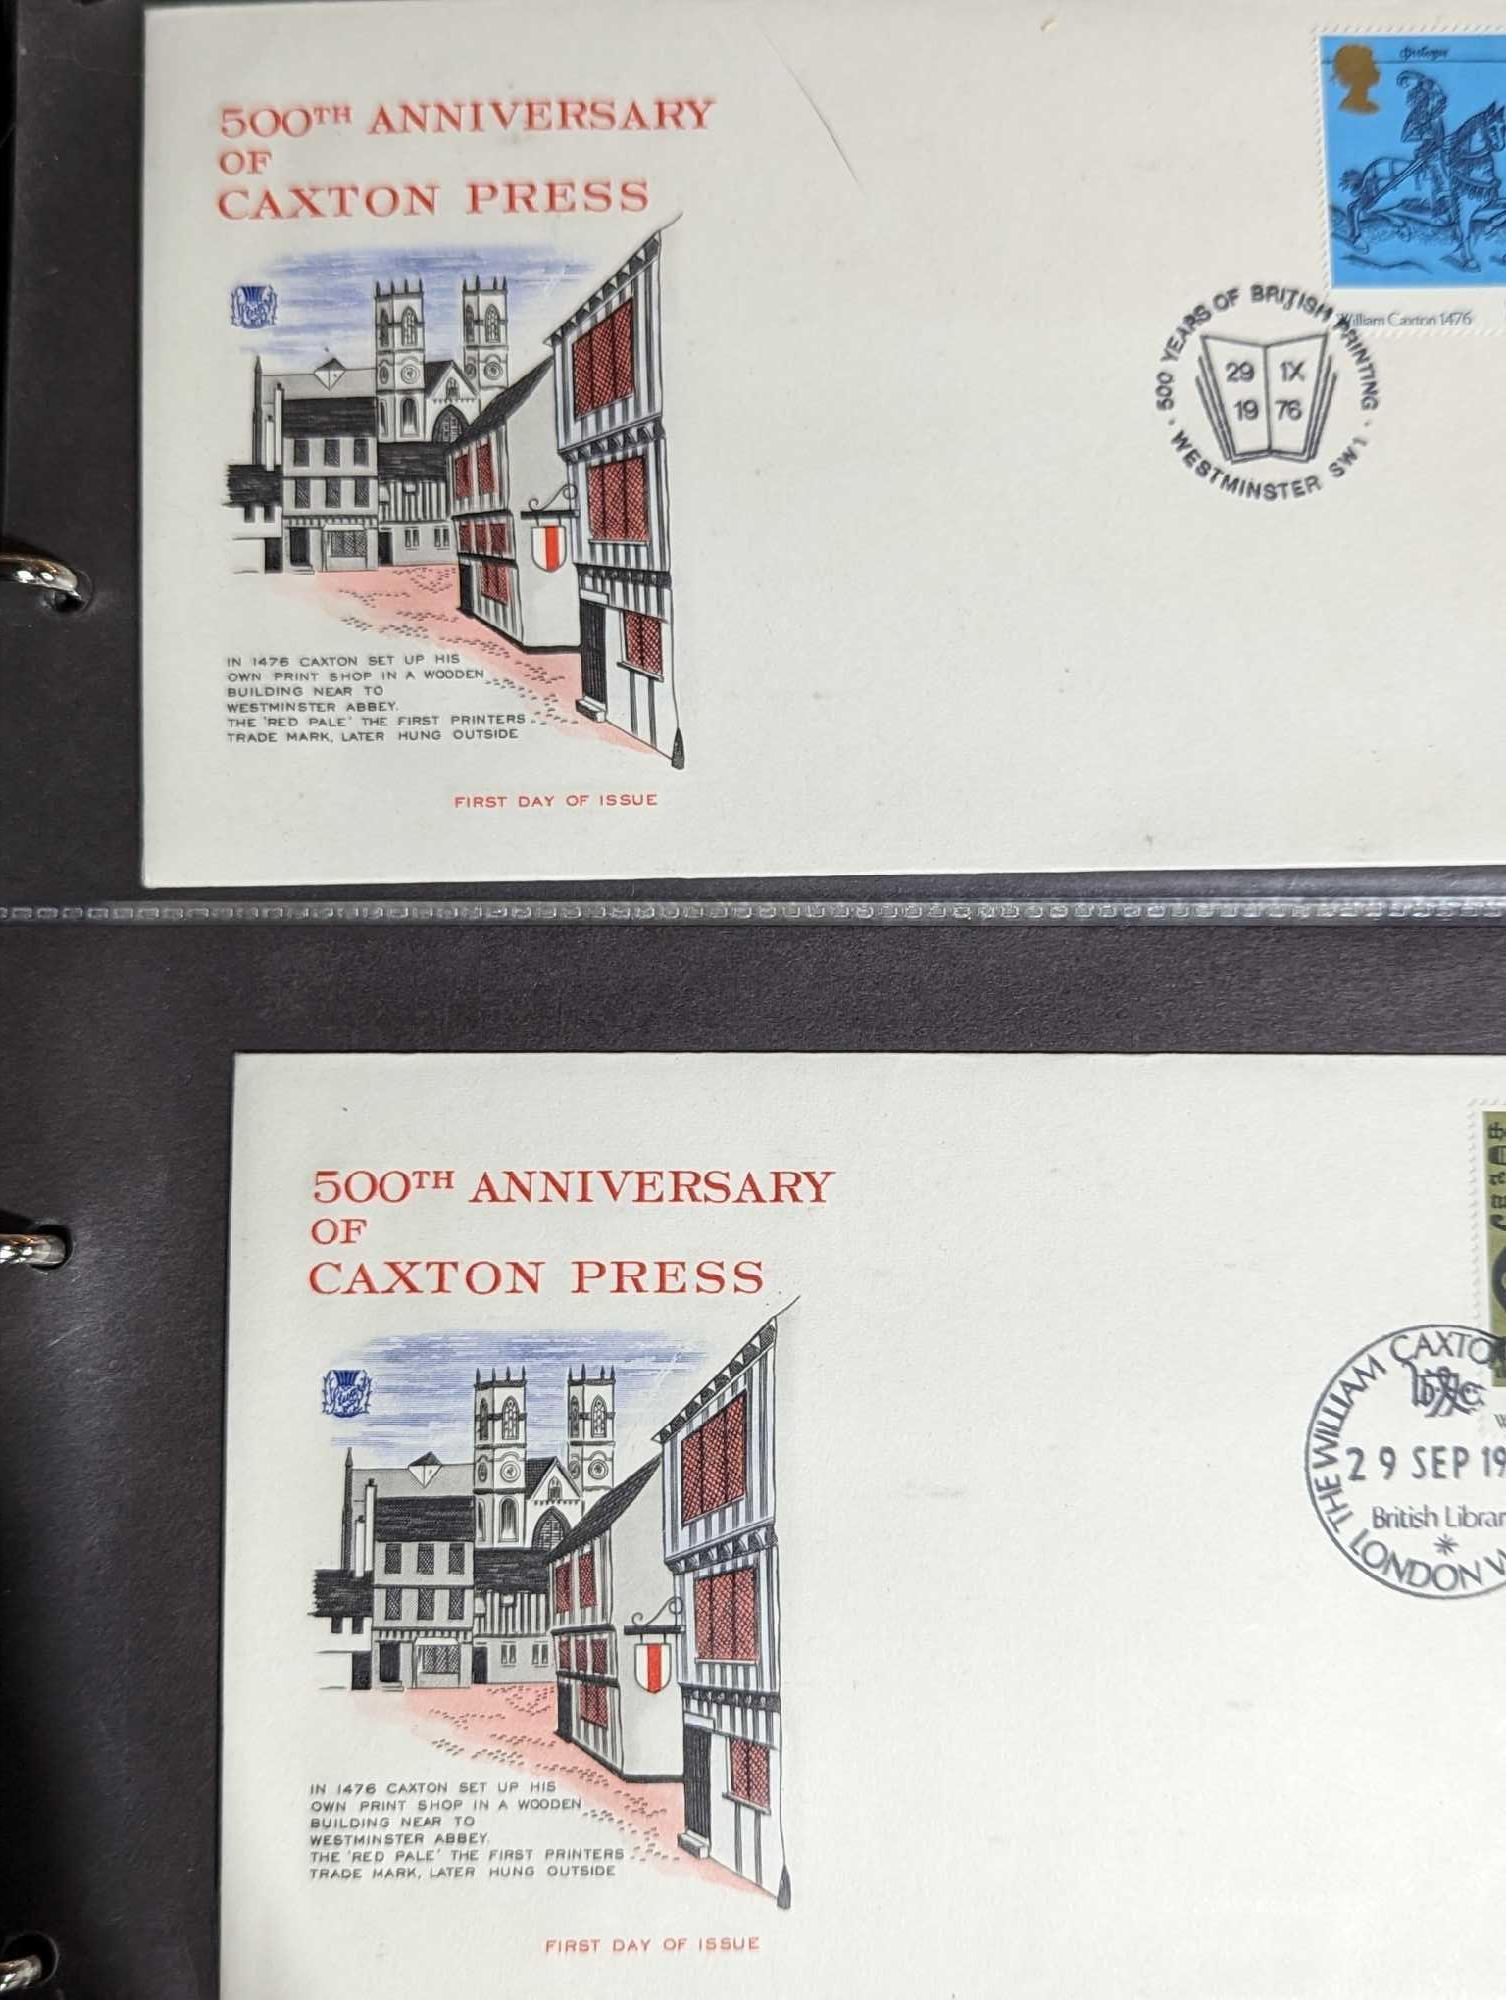 POSTAGE STAMPS - Commemorative First Day Covers c. - Image 17 of 17